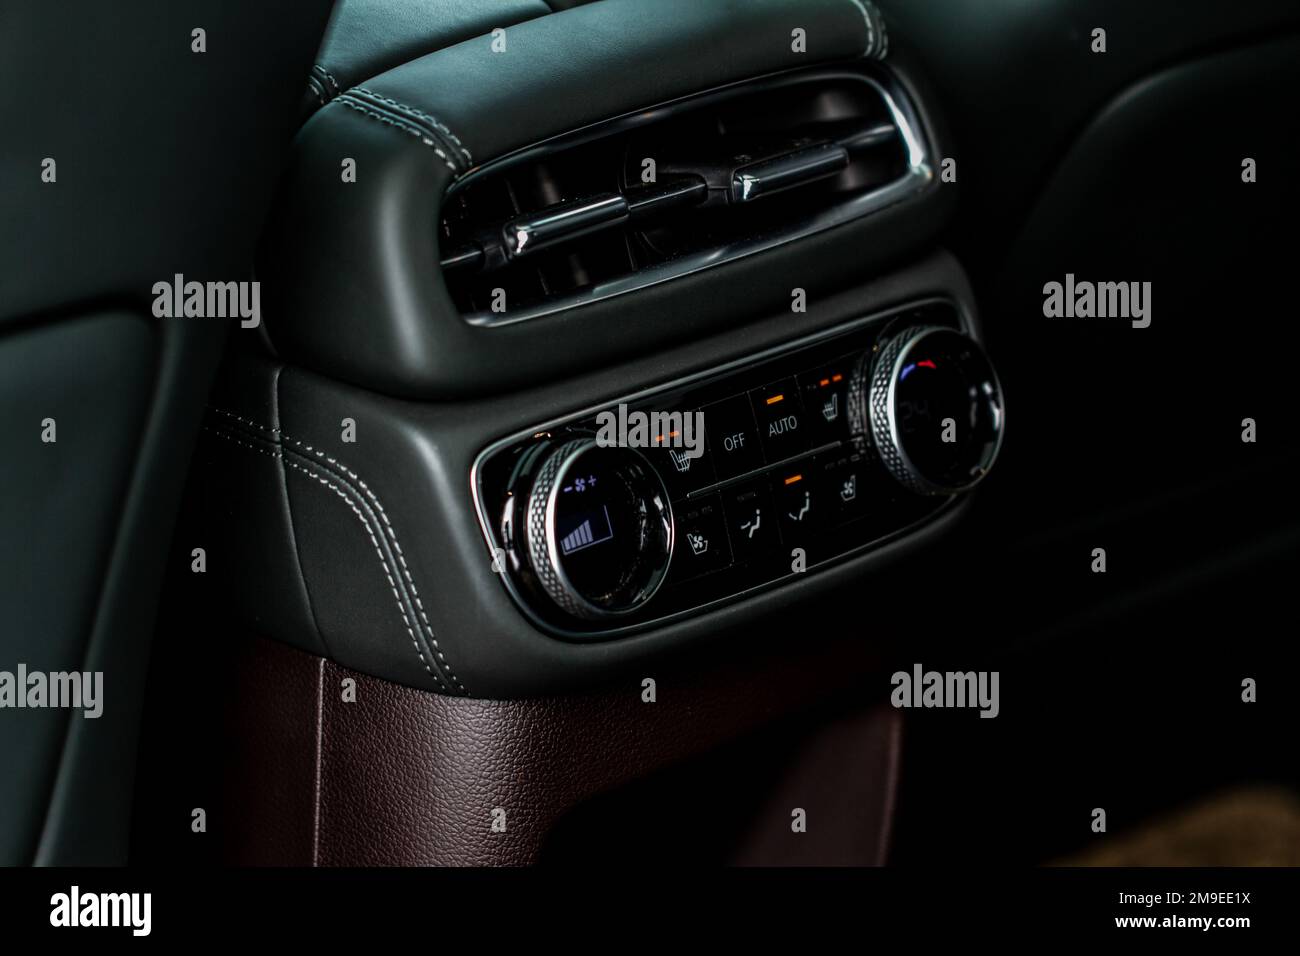 Modern car. Digital second row seat temperature control. Car air conditioning system button. Automatic climate control system. Fan speed and temperatu Stock Photo